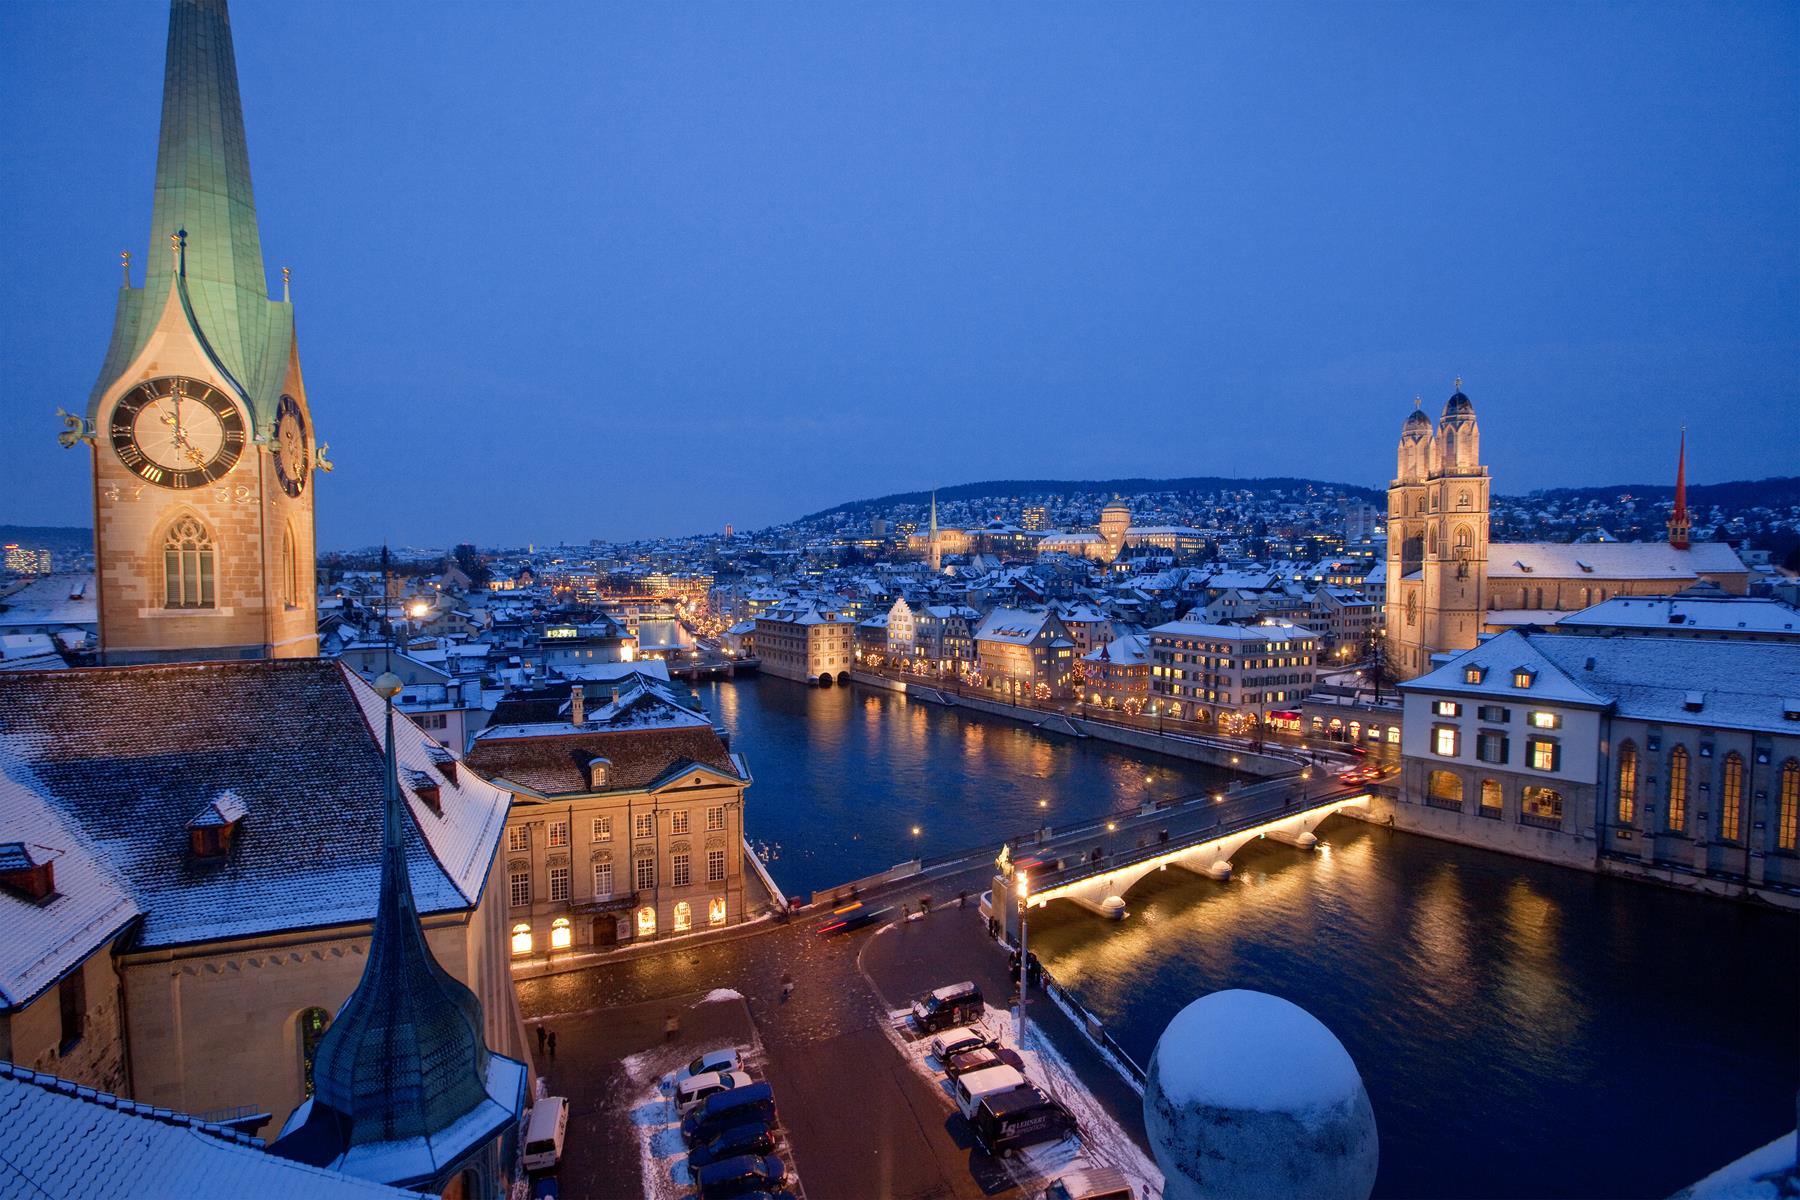 Zurich’s Old Town sits on the River Limmat along with the Grossmünster Cathedral and Fraumünster Church.